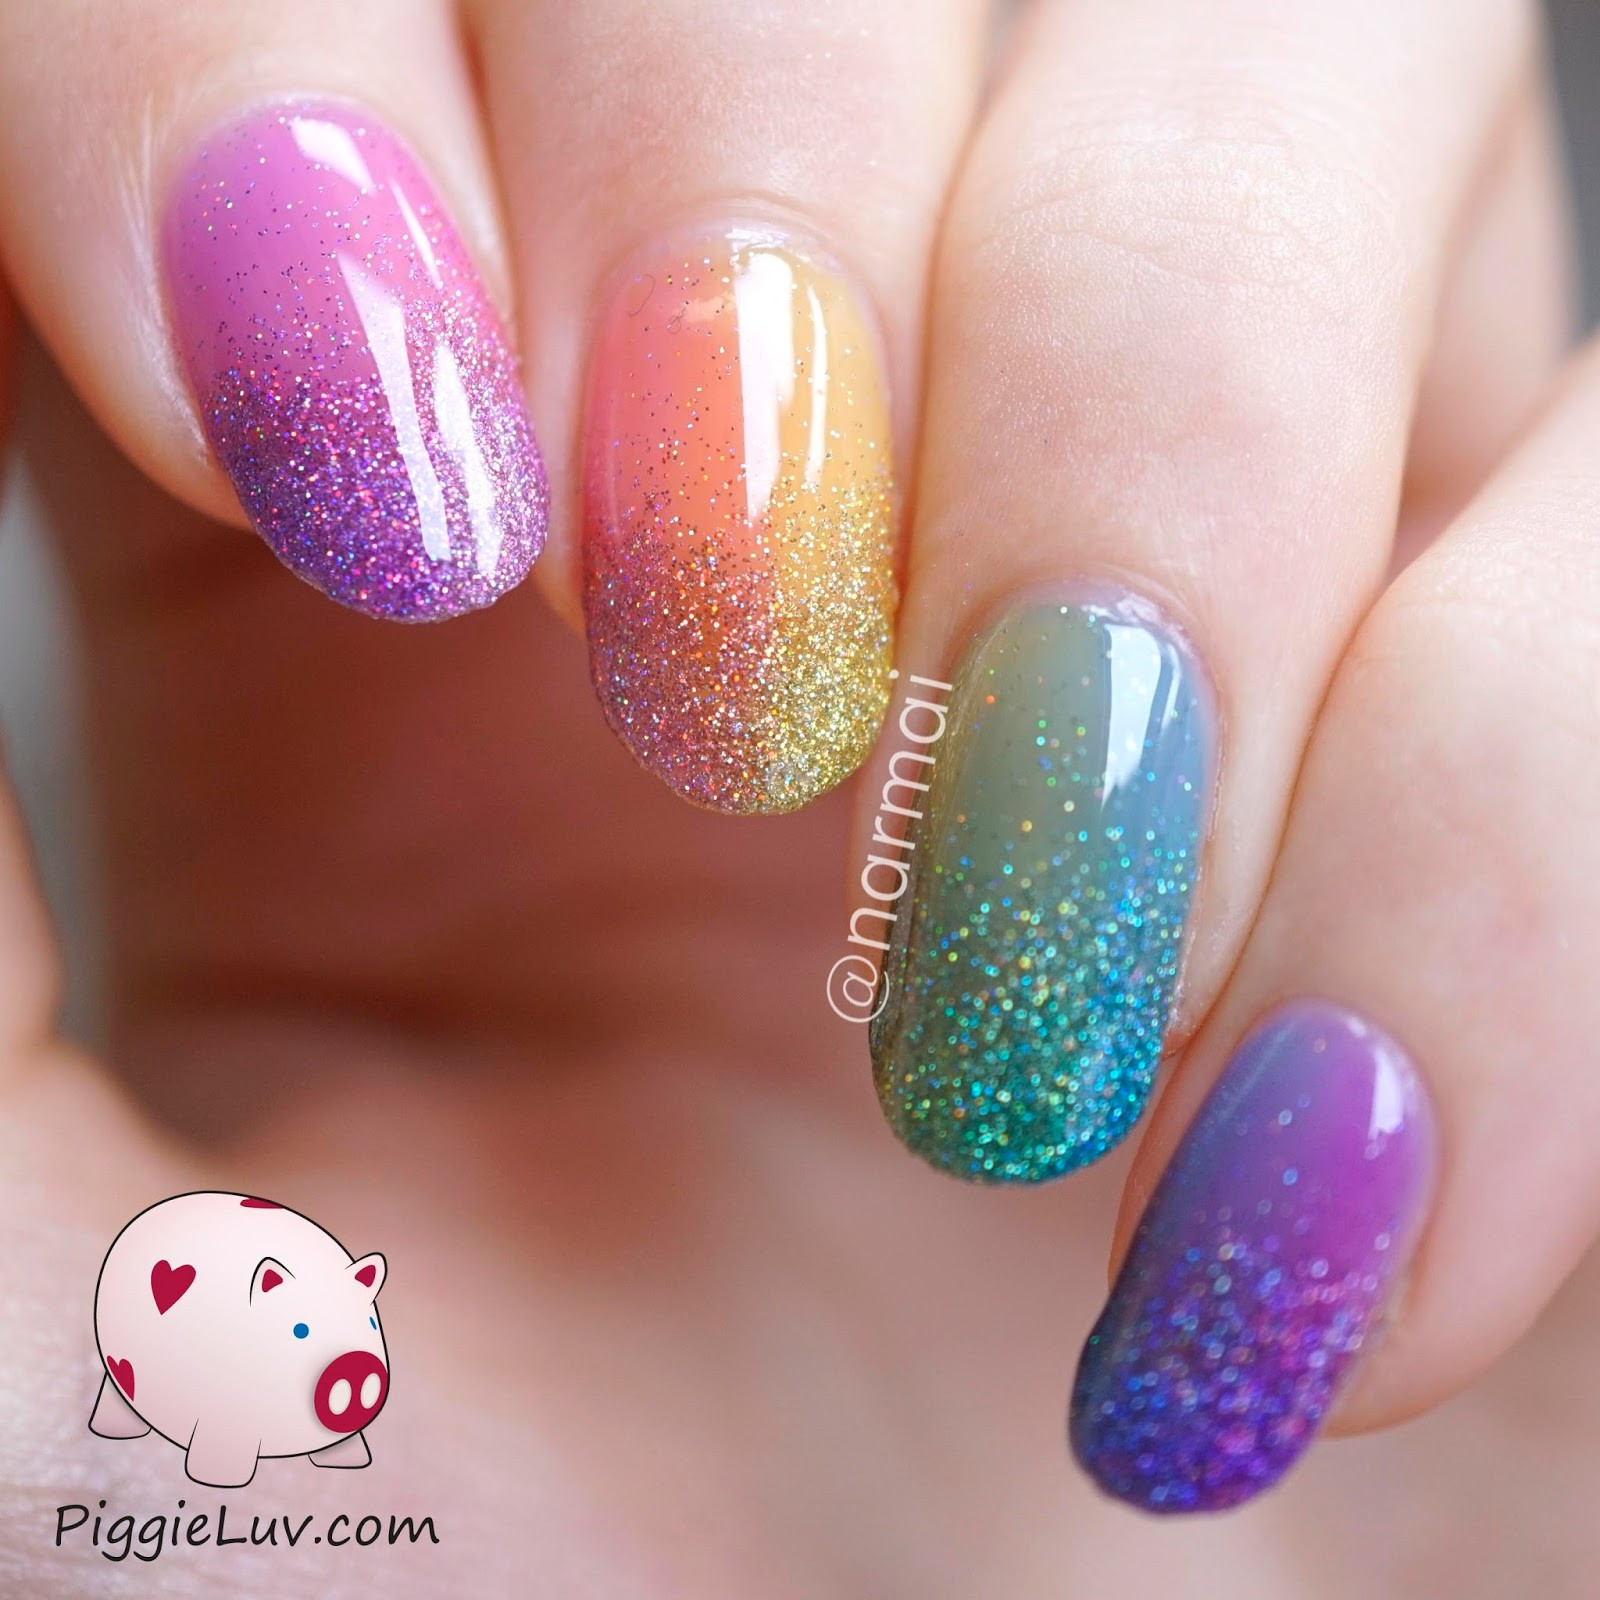 Glitter Nail Art Designs
 15 Sparkly Nail Designs You Have To Try